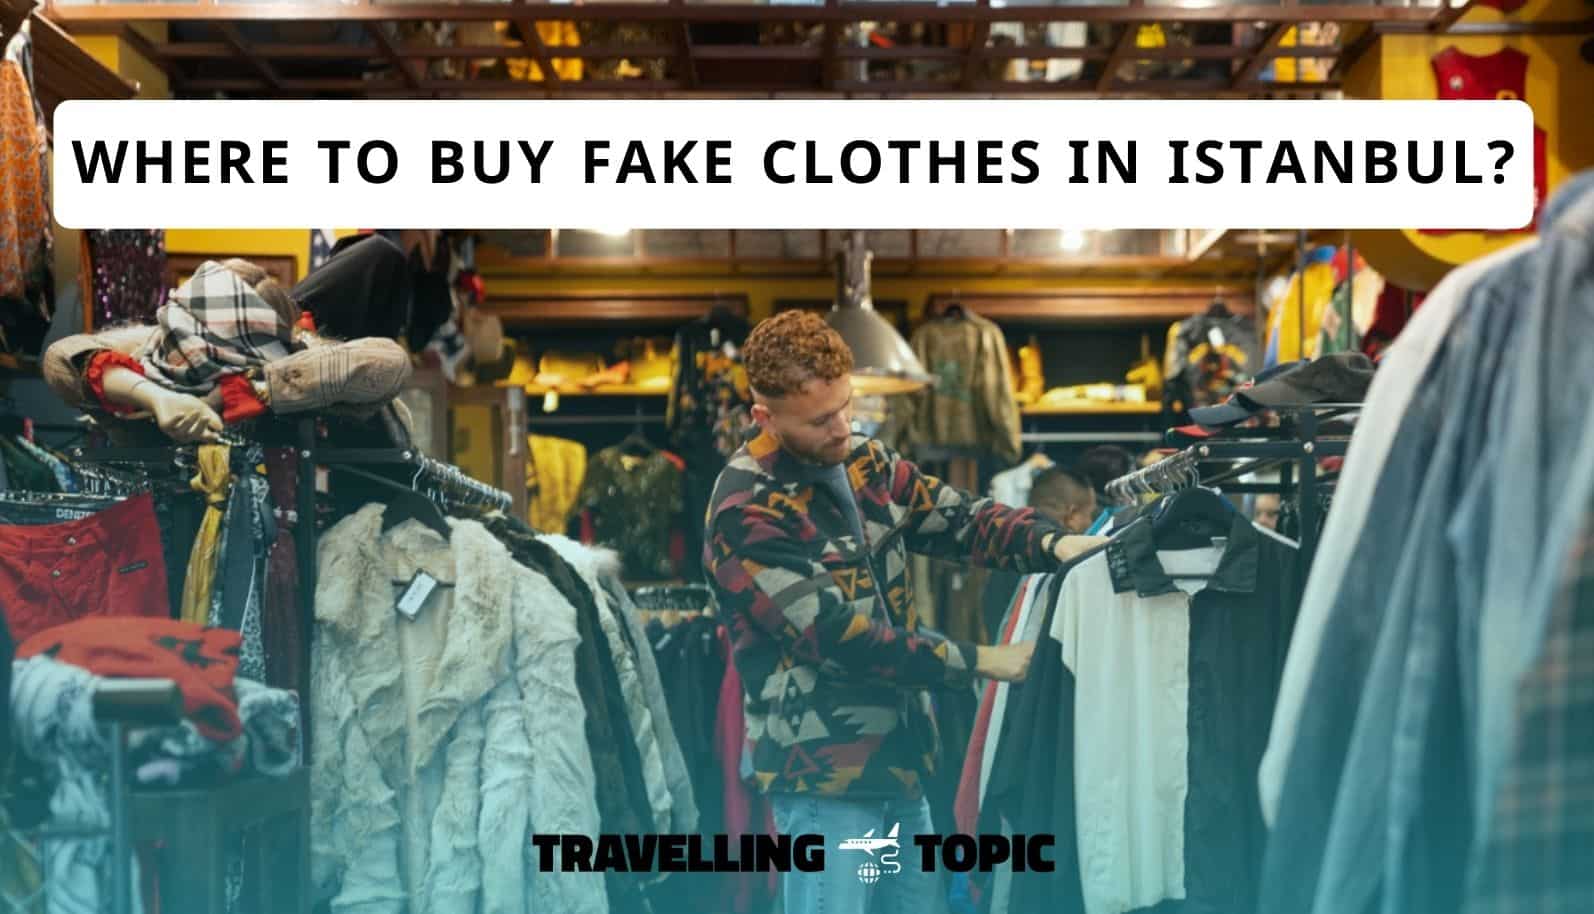 What is the best website to buy cheap fake designer stuff in Istanbul? -  Quora